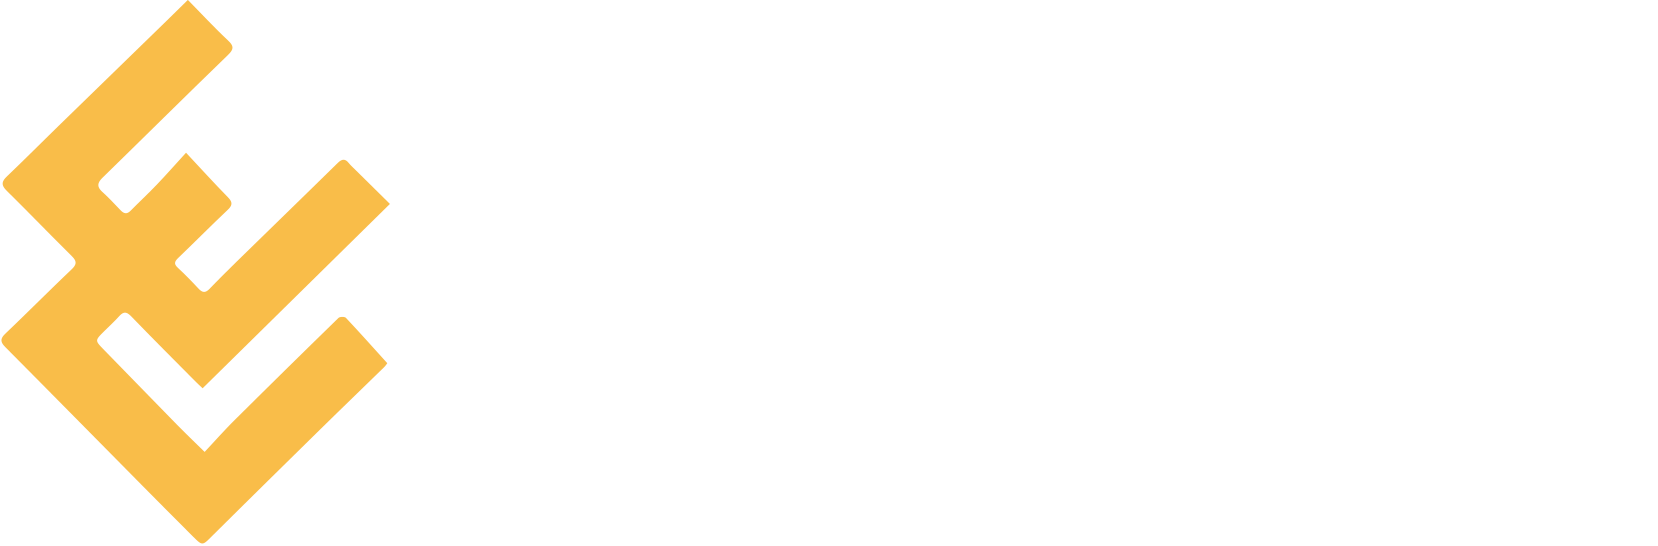 Enrich Creations and Advertising Agency | Interior Fit-out and Décor